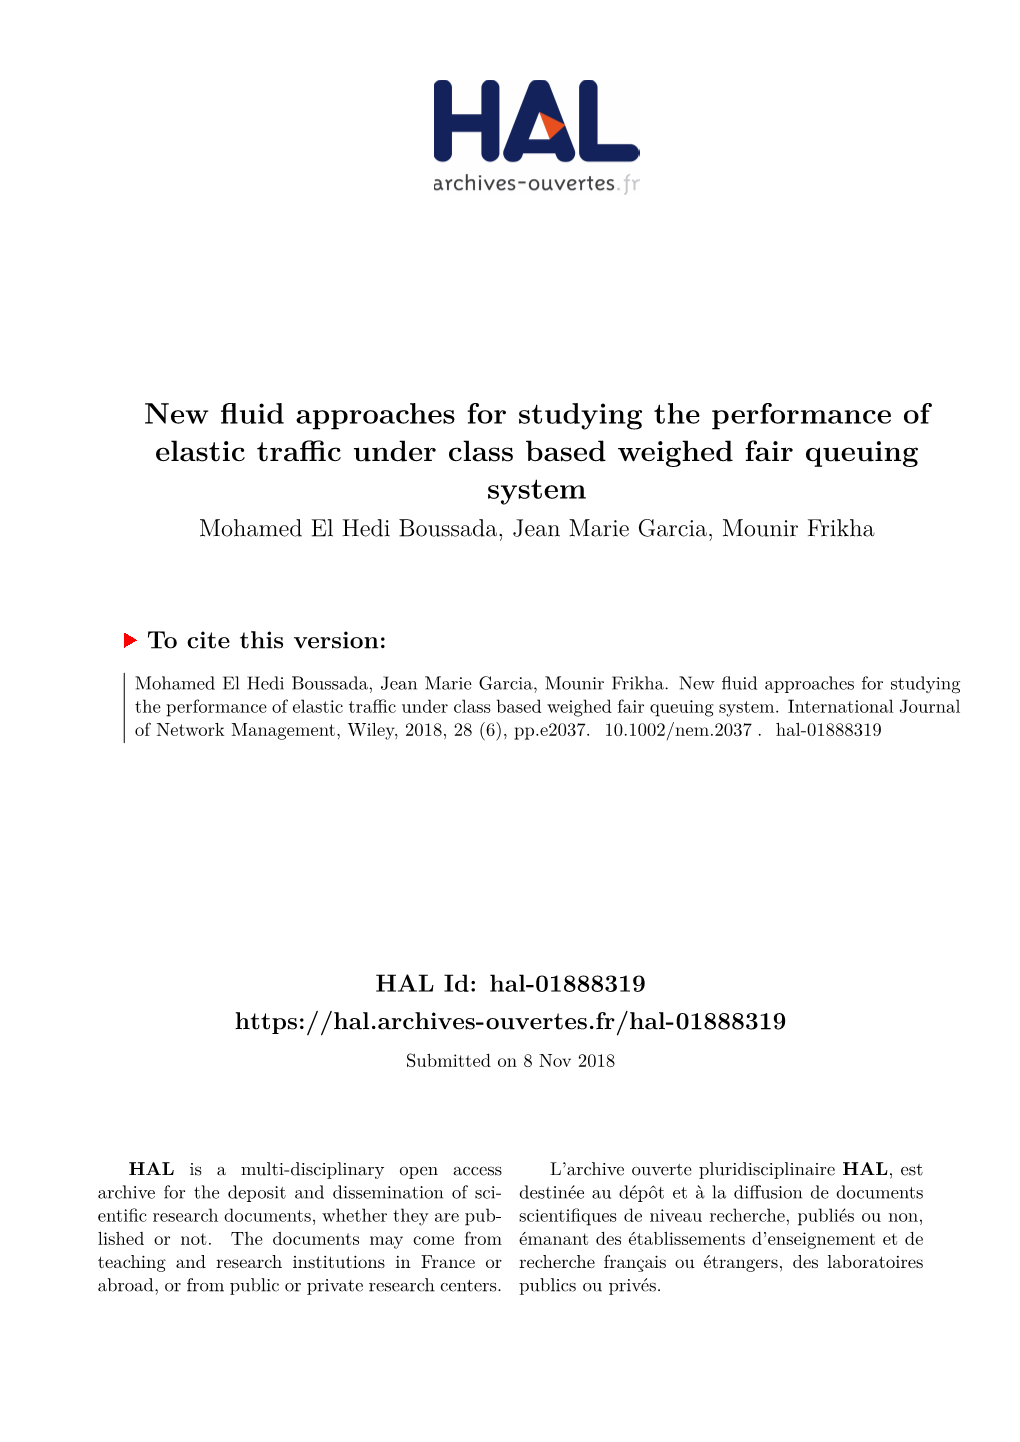 New Fluid Approaches for Studying the Performance of Elastic Traffic Under